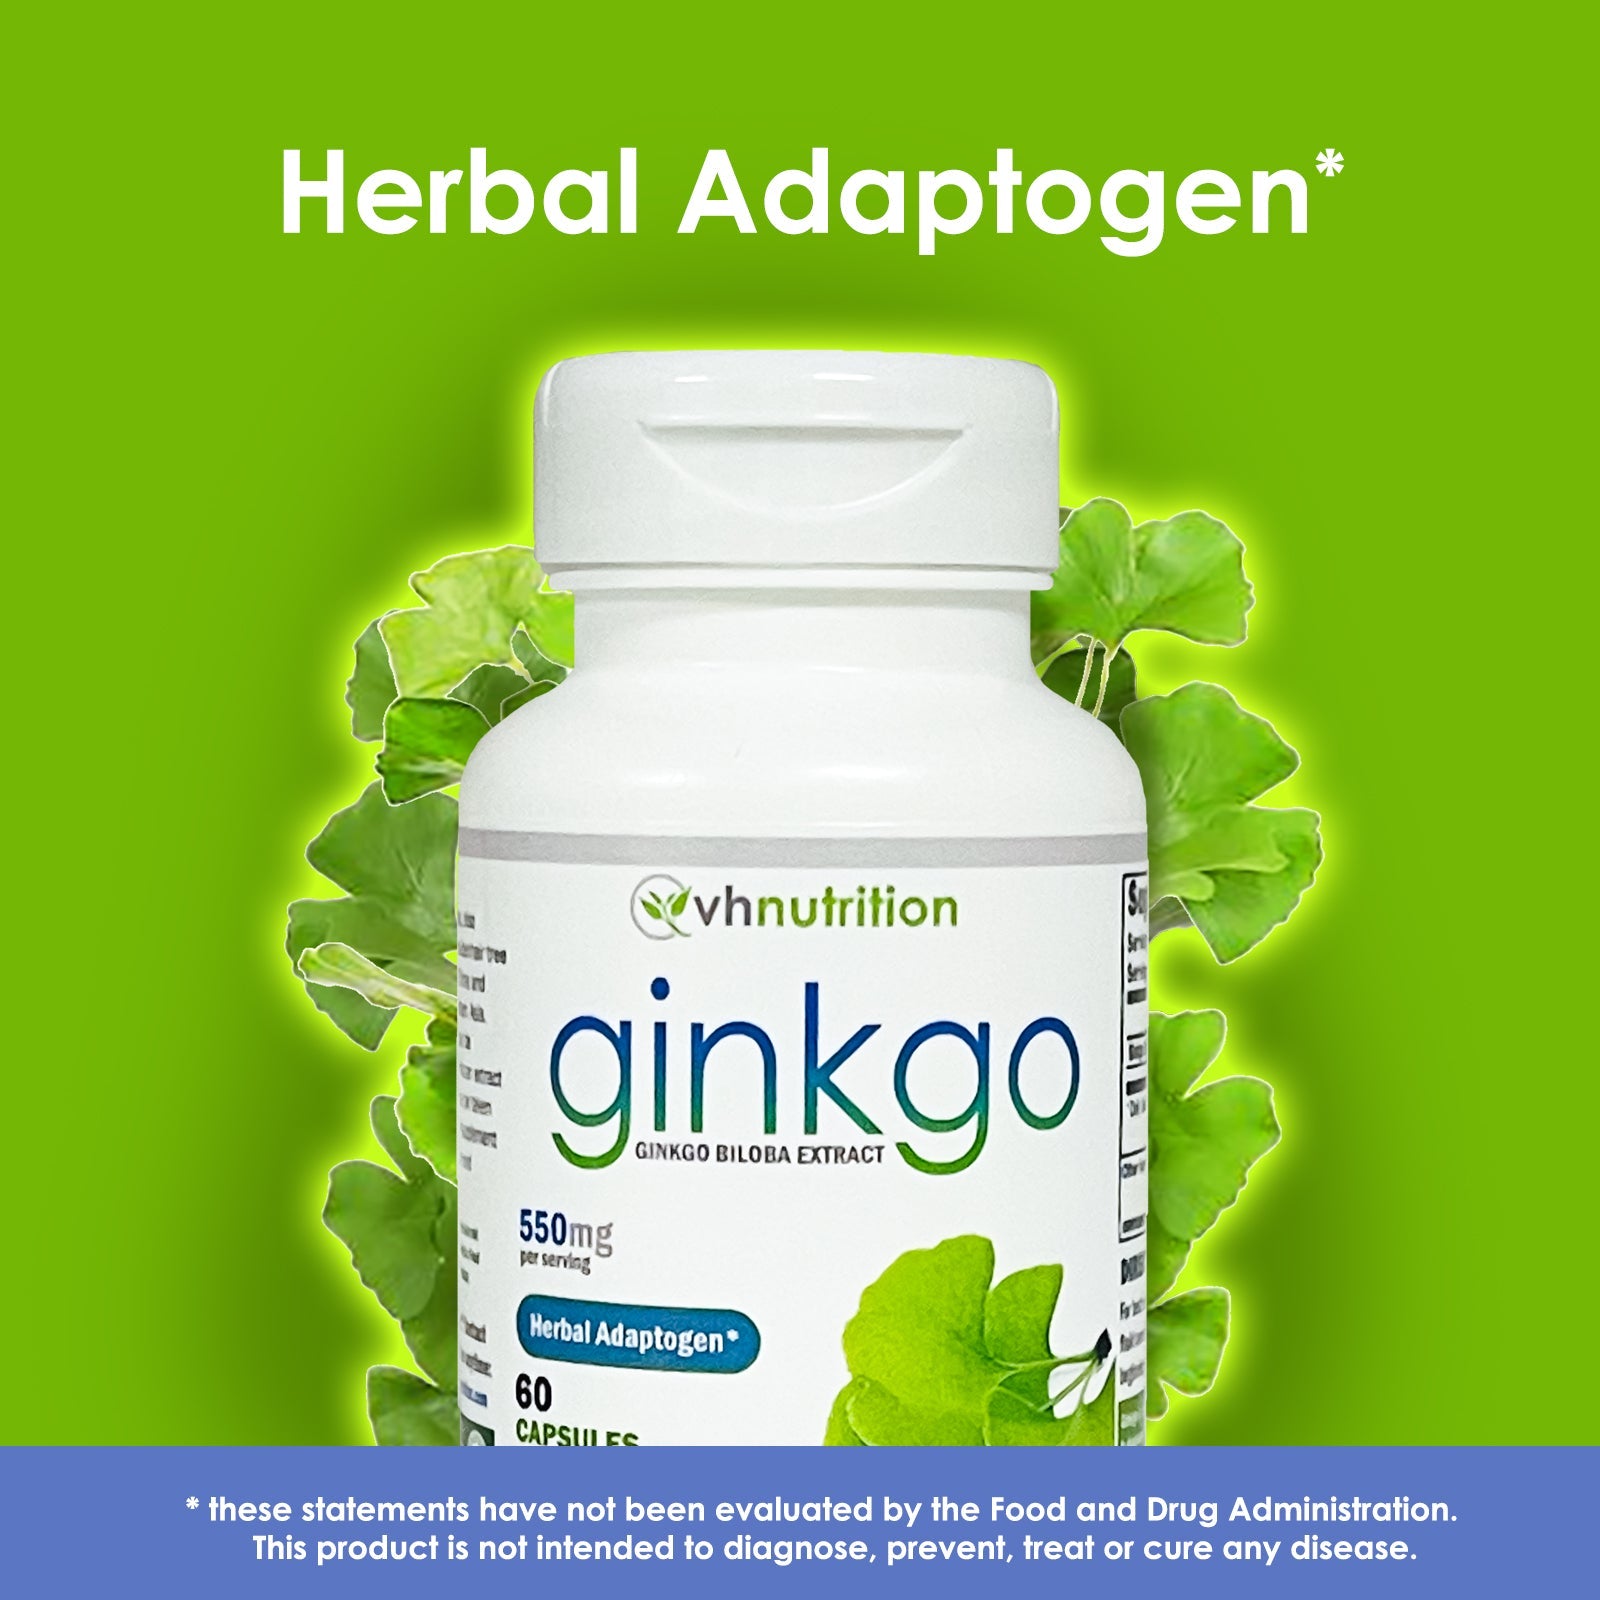 VH Nutrition GINKGO BILOBA | Cognitive and Memory Support* Supplement | 550mg | 60 Capsules